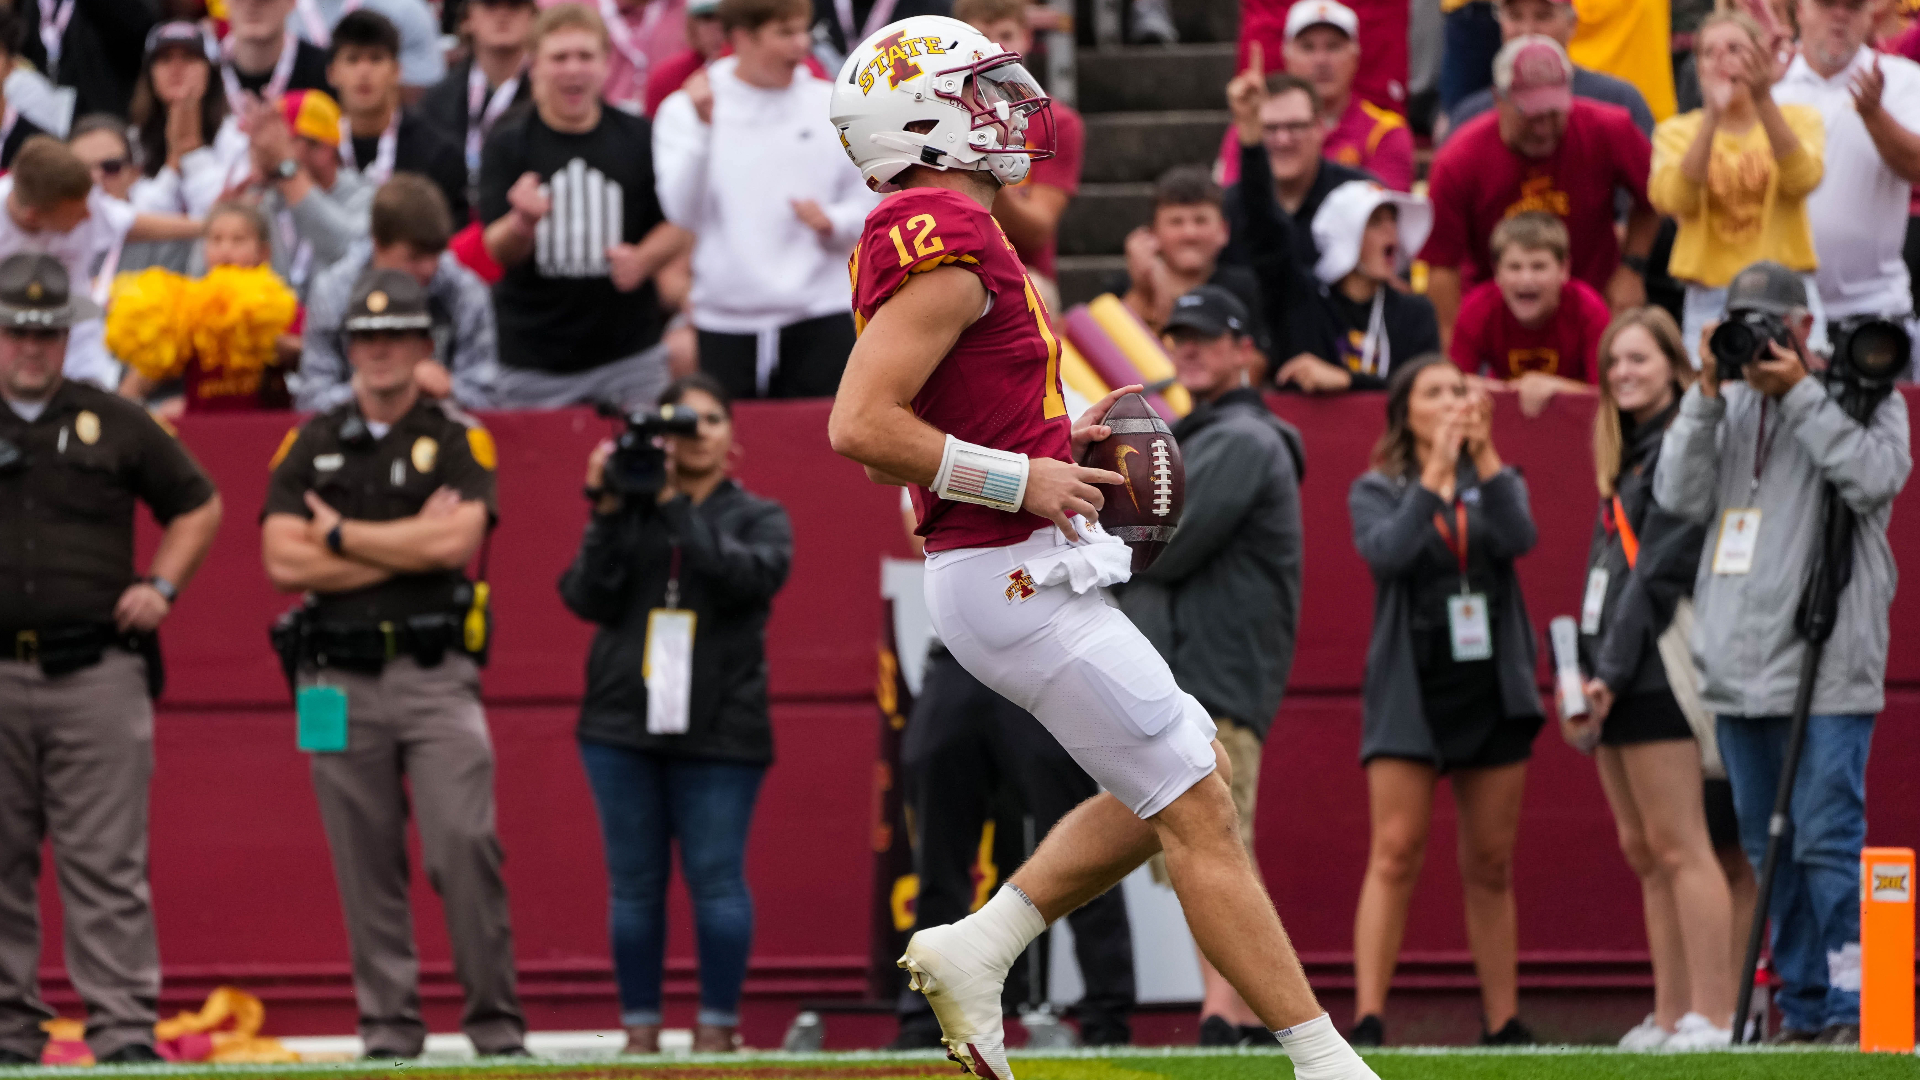 Iowa State QB Among Athletes Accused Of Betting On Own Games